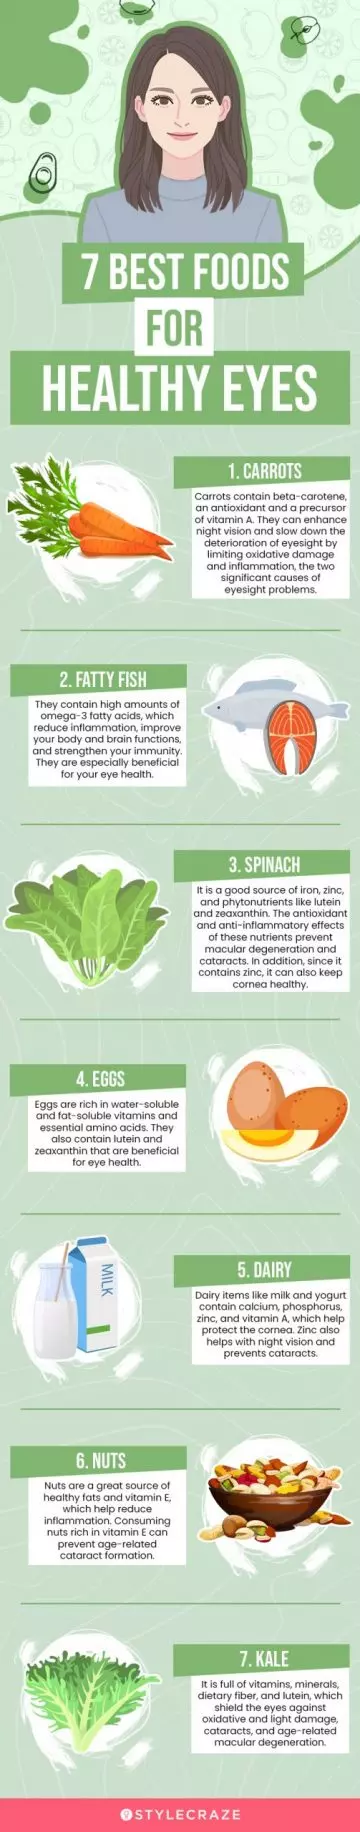 7 best foods for healthy eyes (infographic)